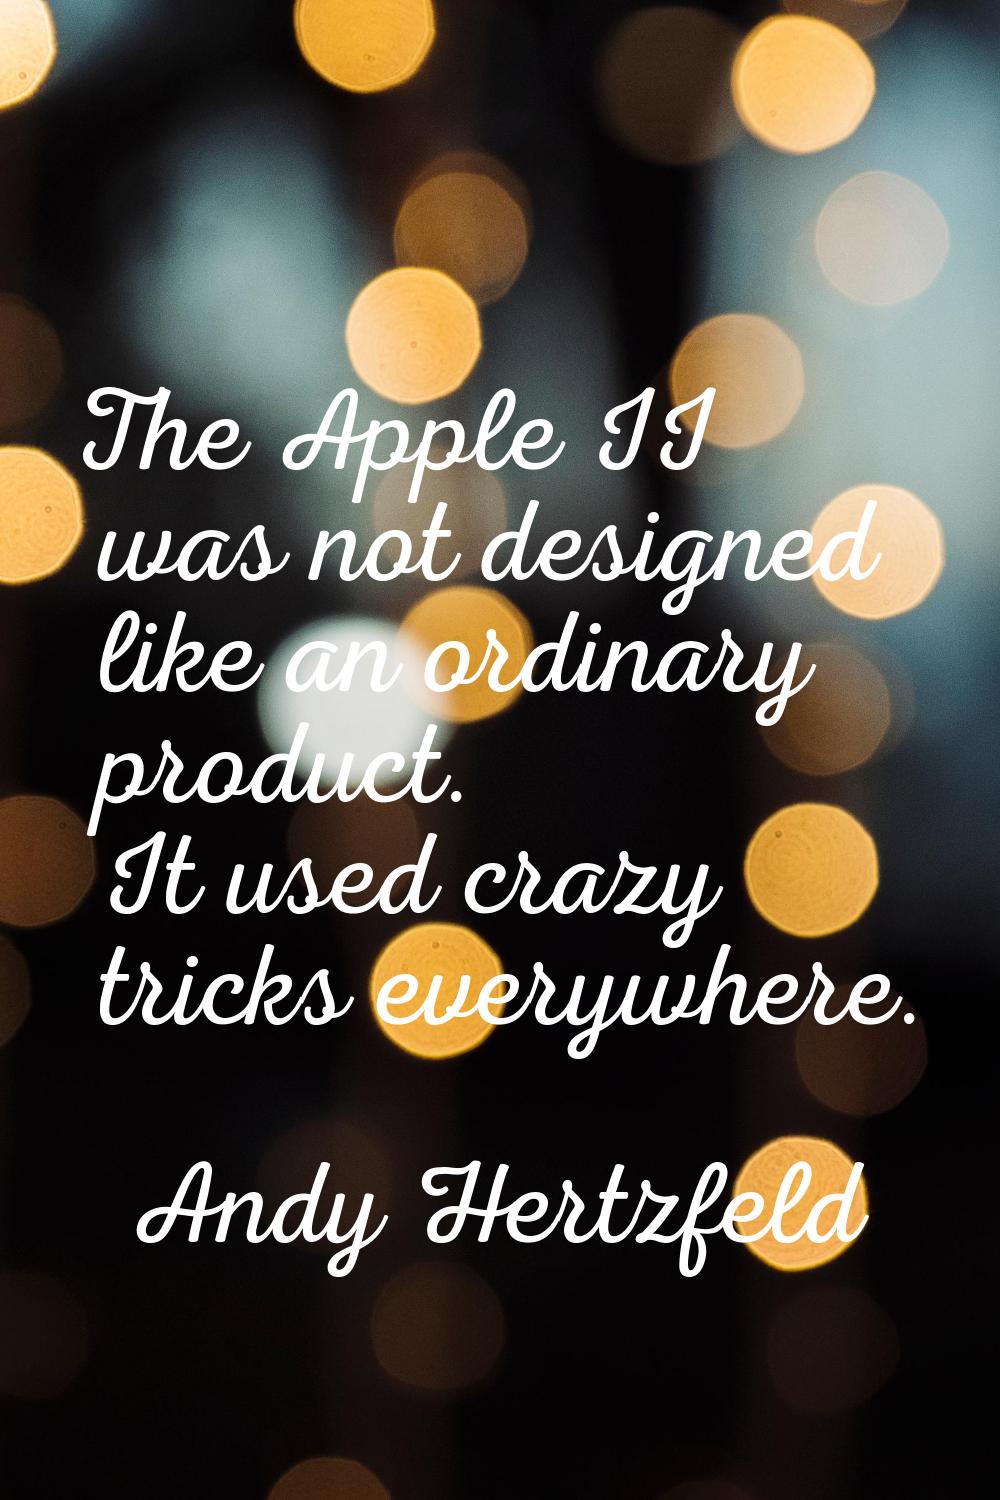 The Apple II was not designed like an ordinary product. It used crazy tricks everywhere.